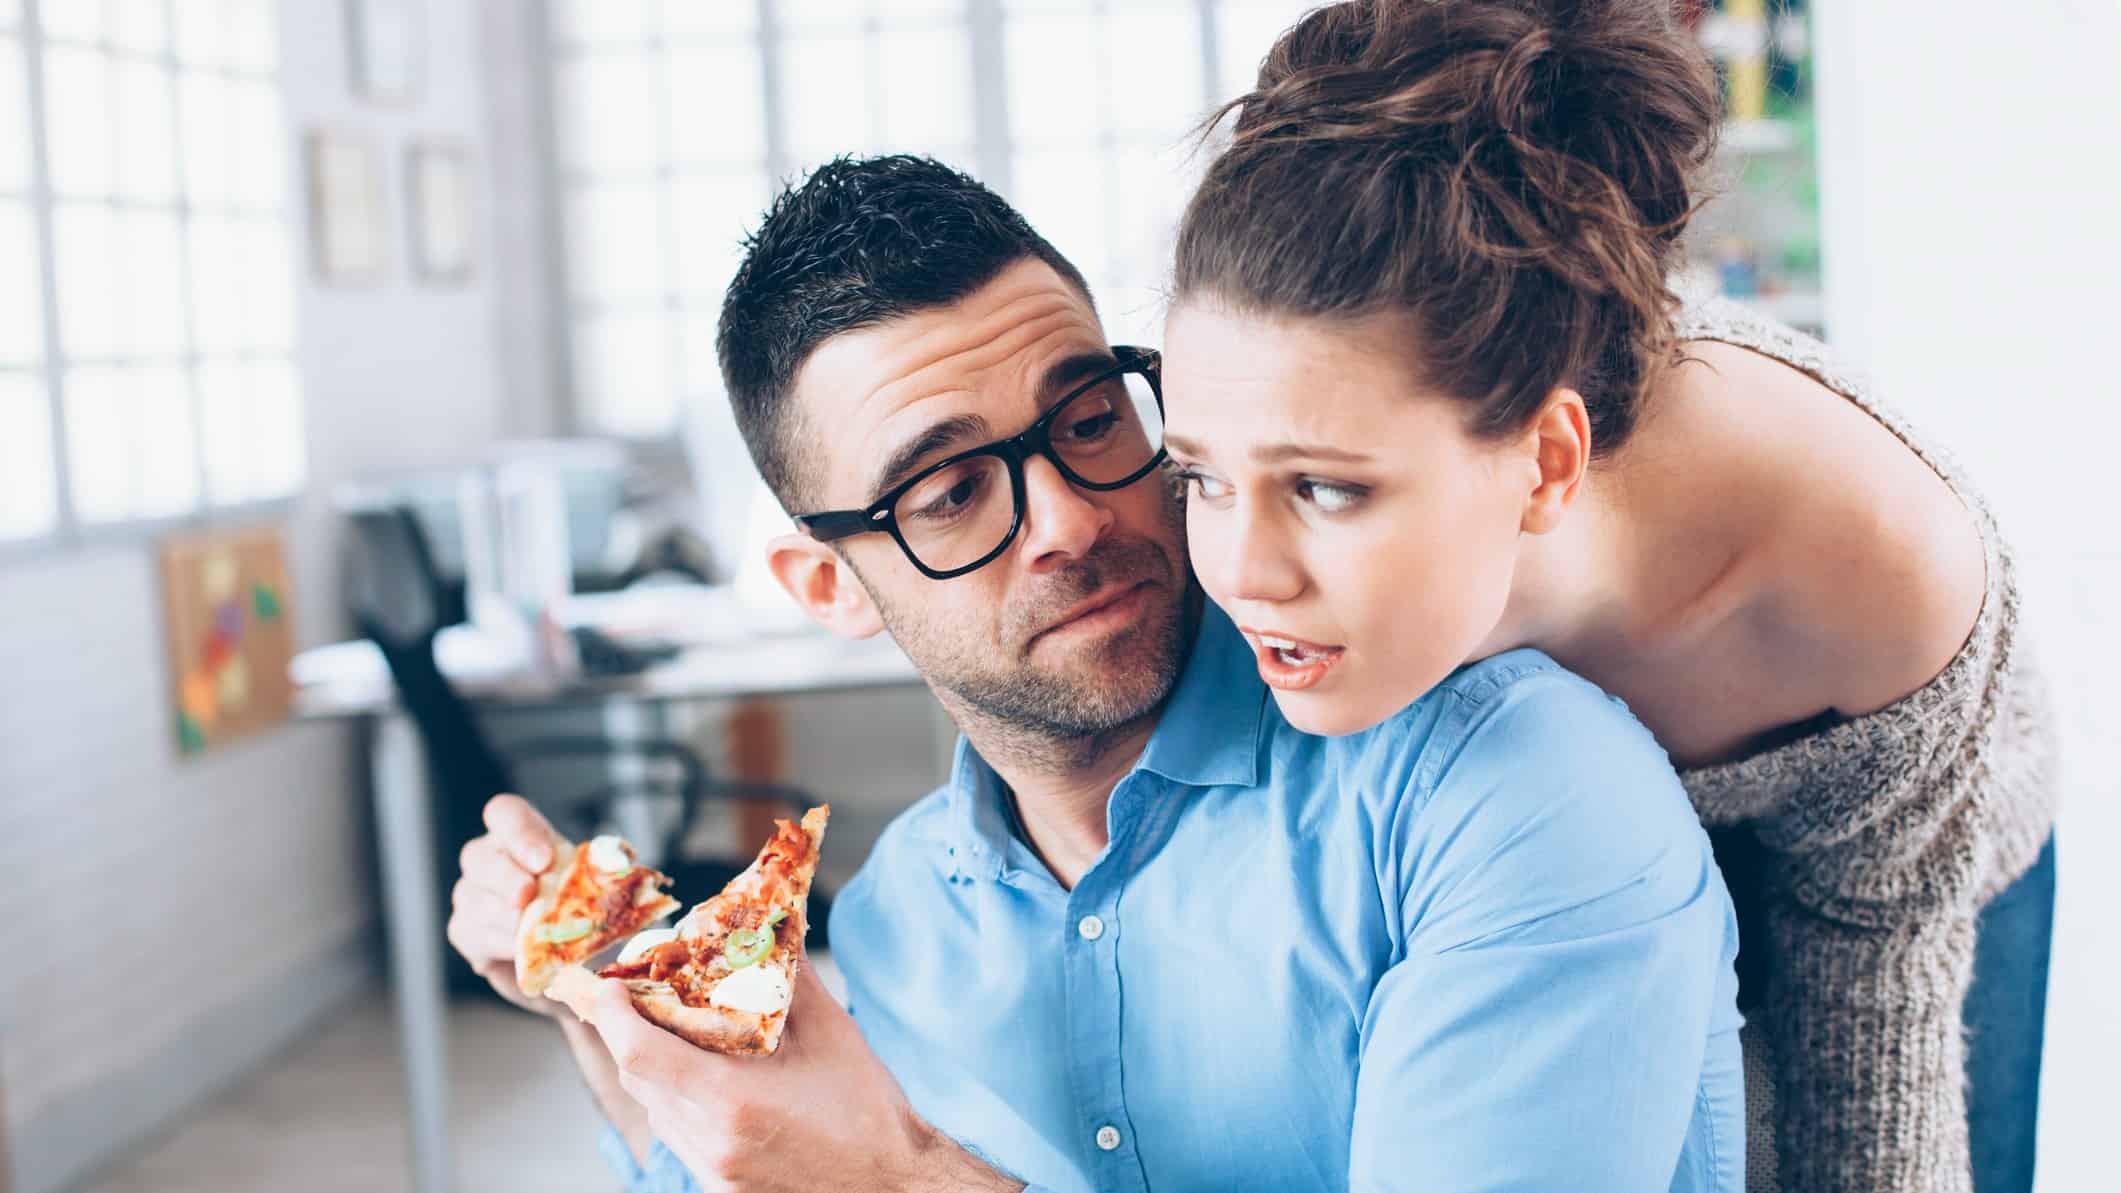 Young couple having pizza lunch break at workplace.